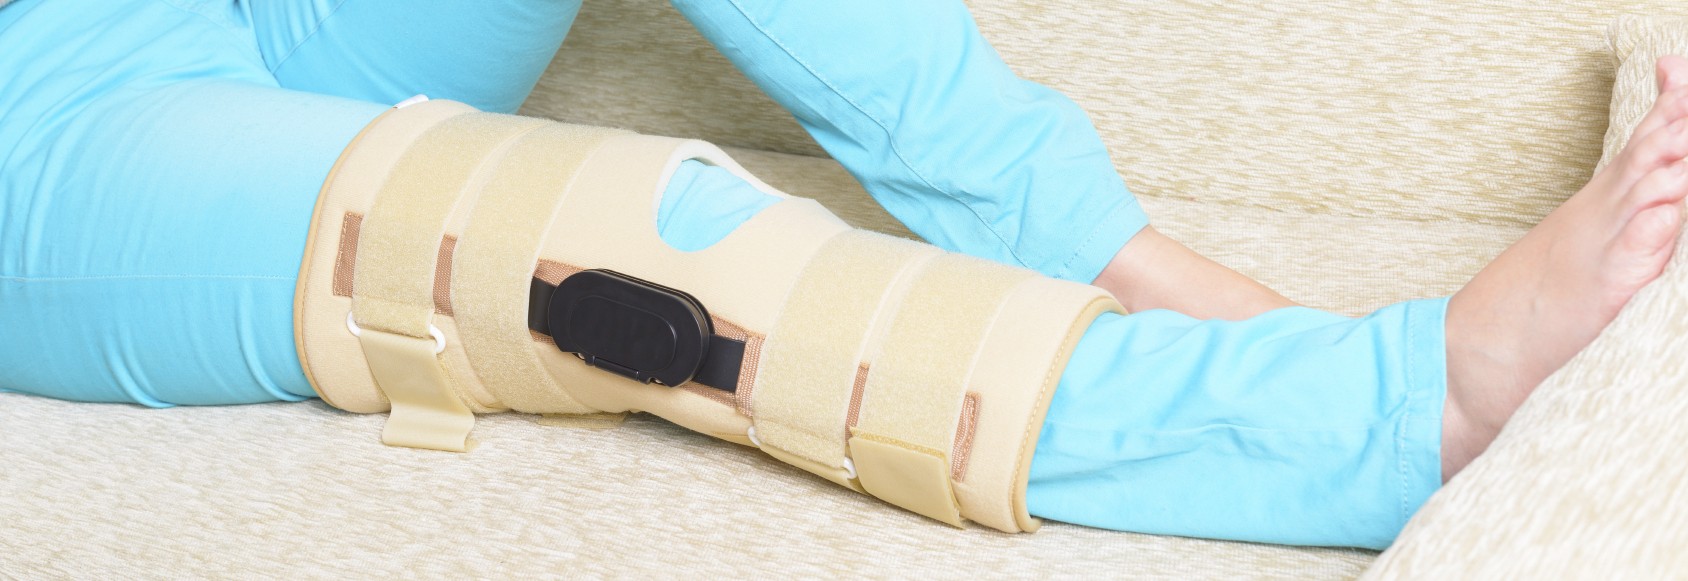 Joint Support: Braces, Wraps, and Compression Gear